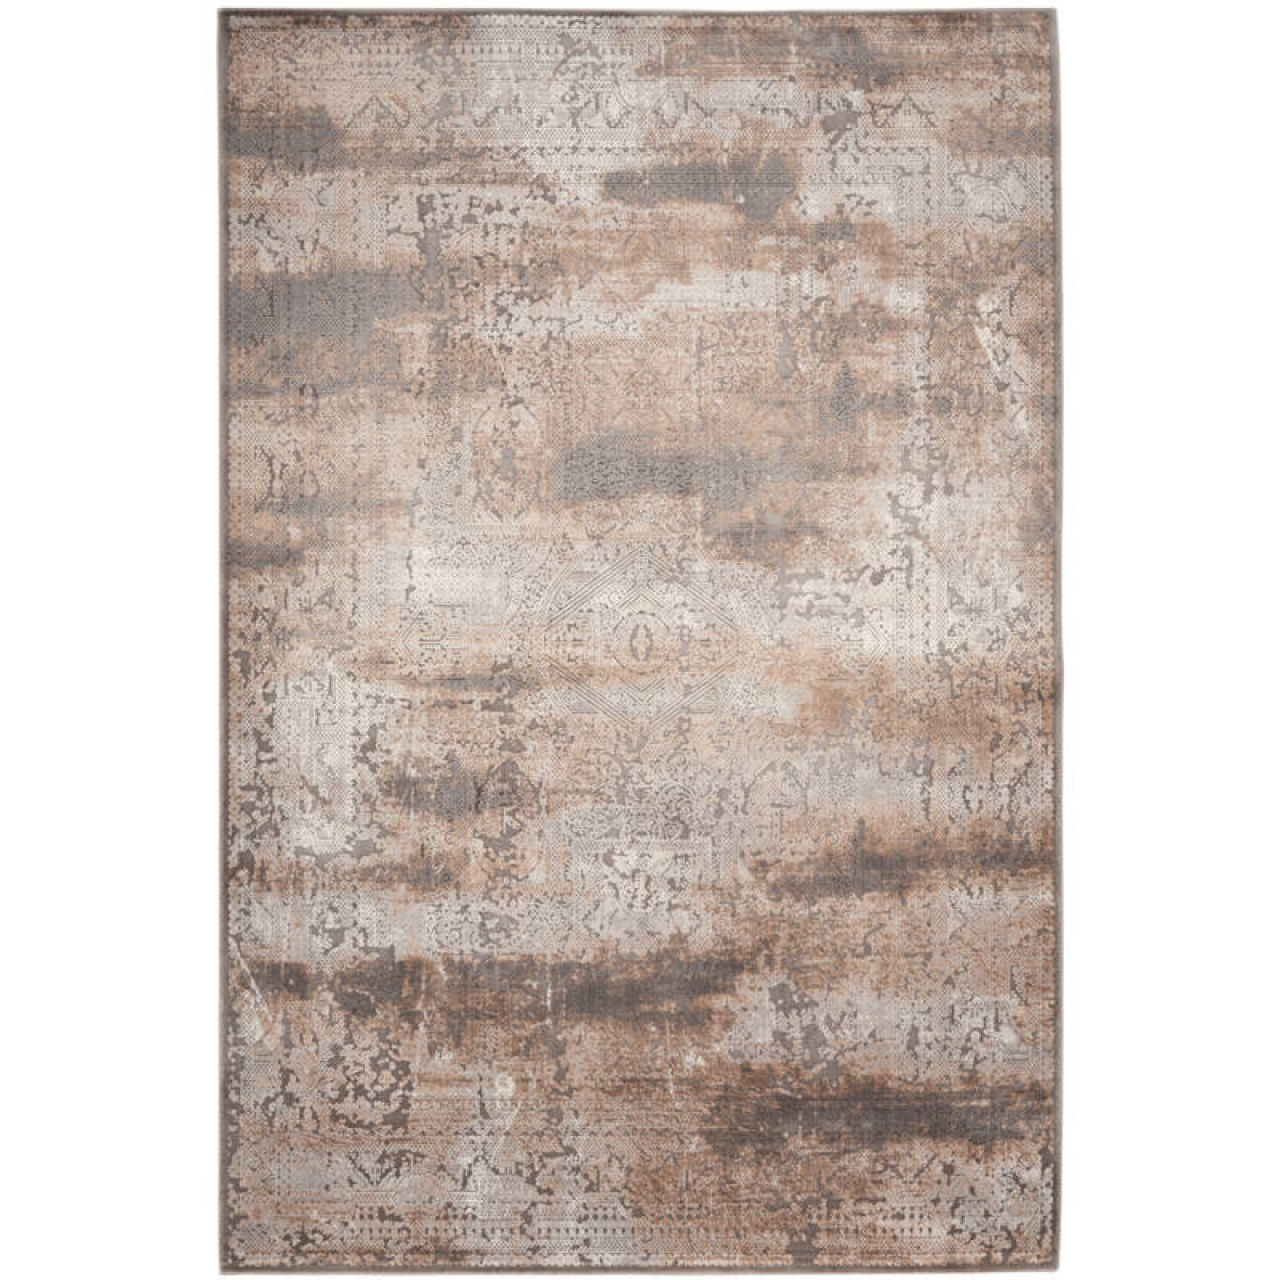 Obsession Haute Couture Jewel 950 Taupe szőnyeg-240x340